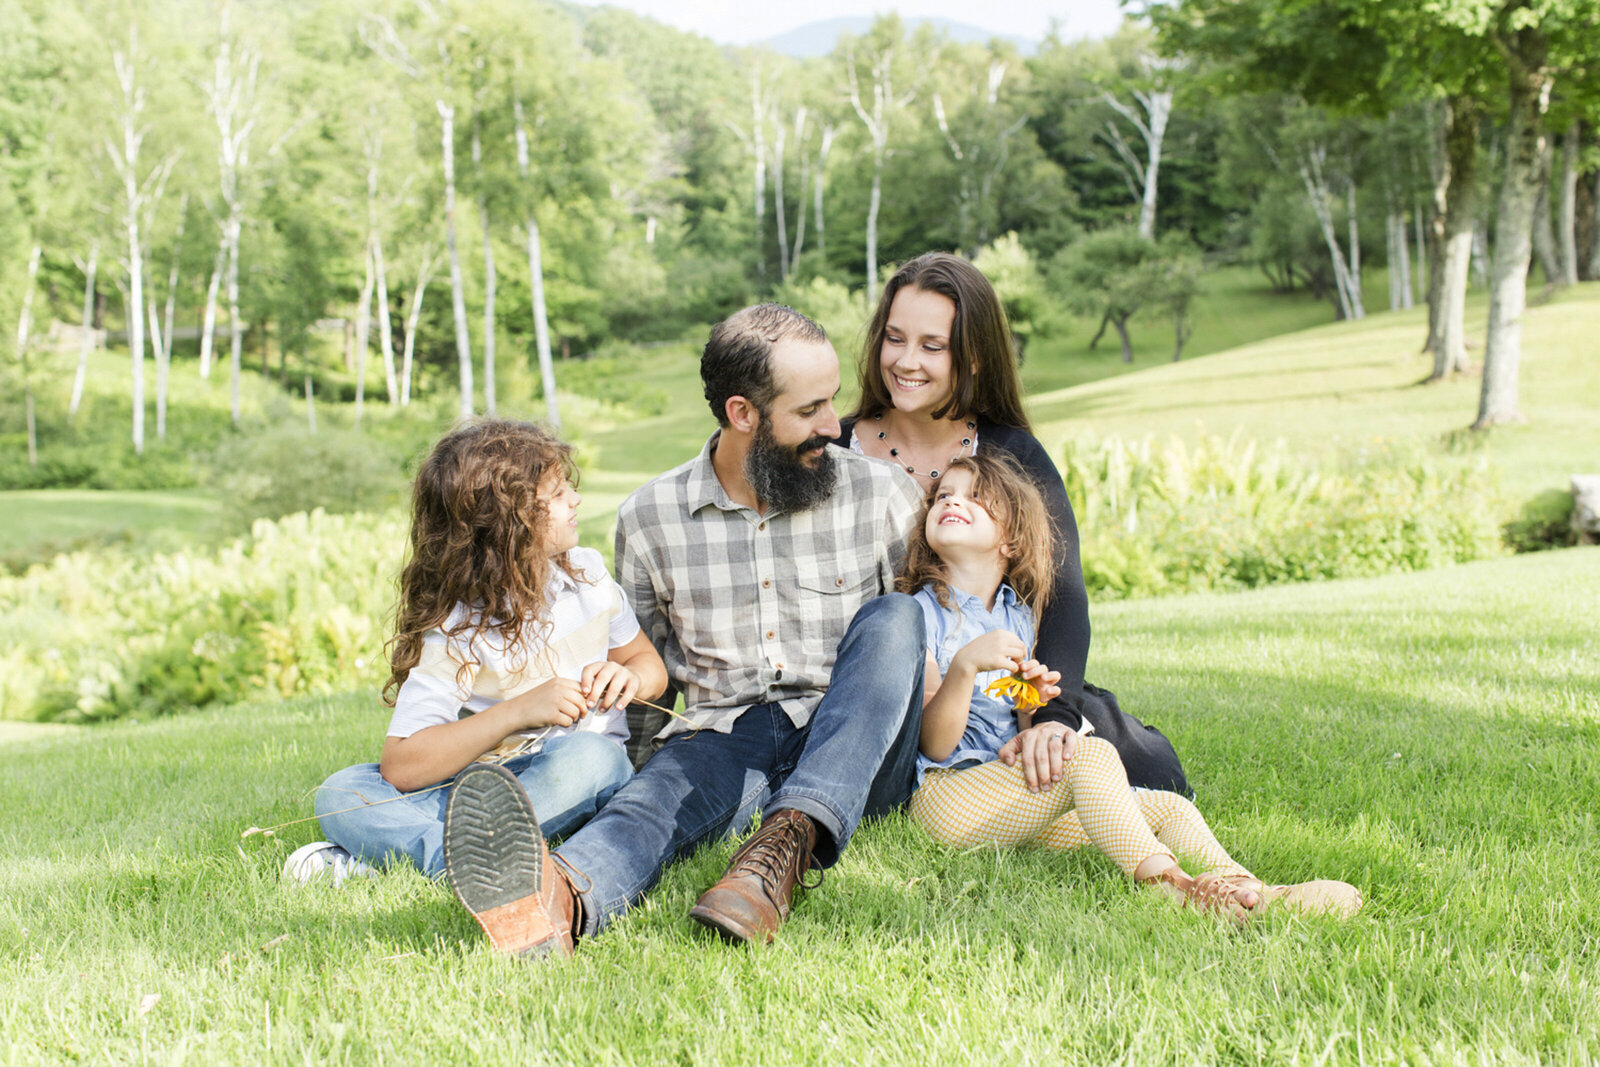 vermont-family-photography-new-england-family-portraits-53